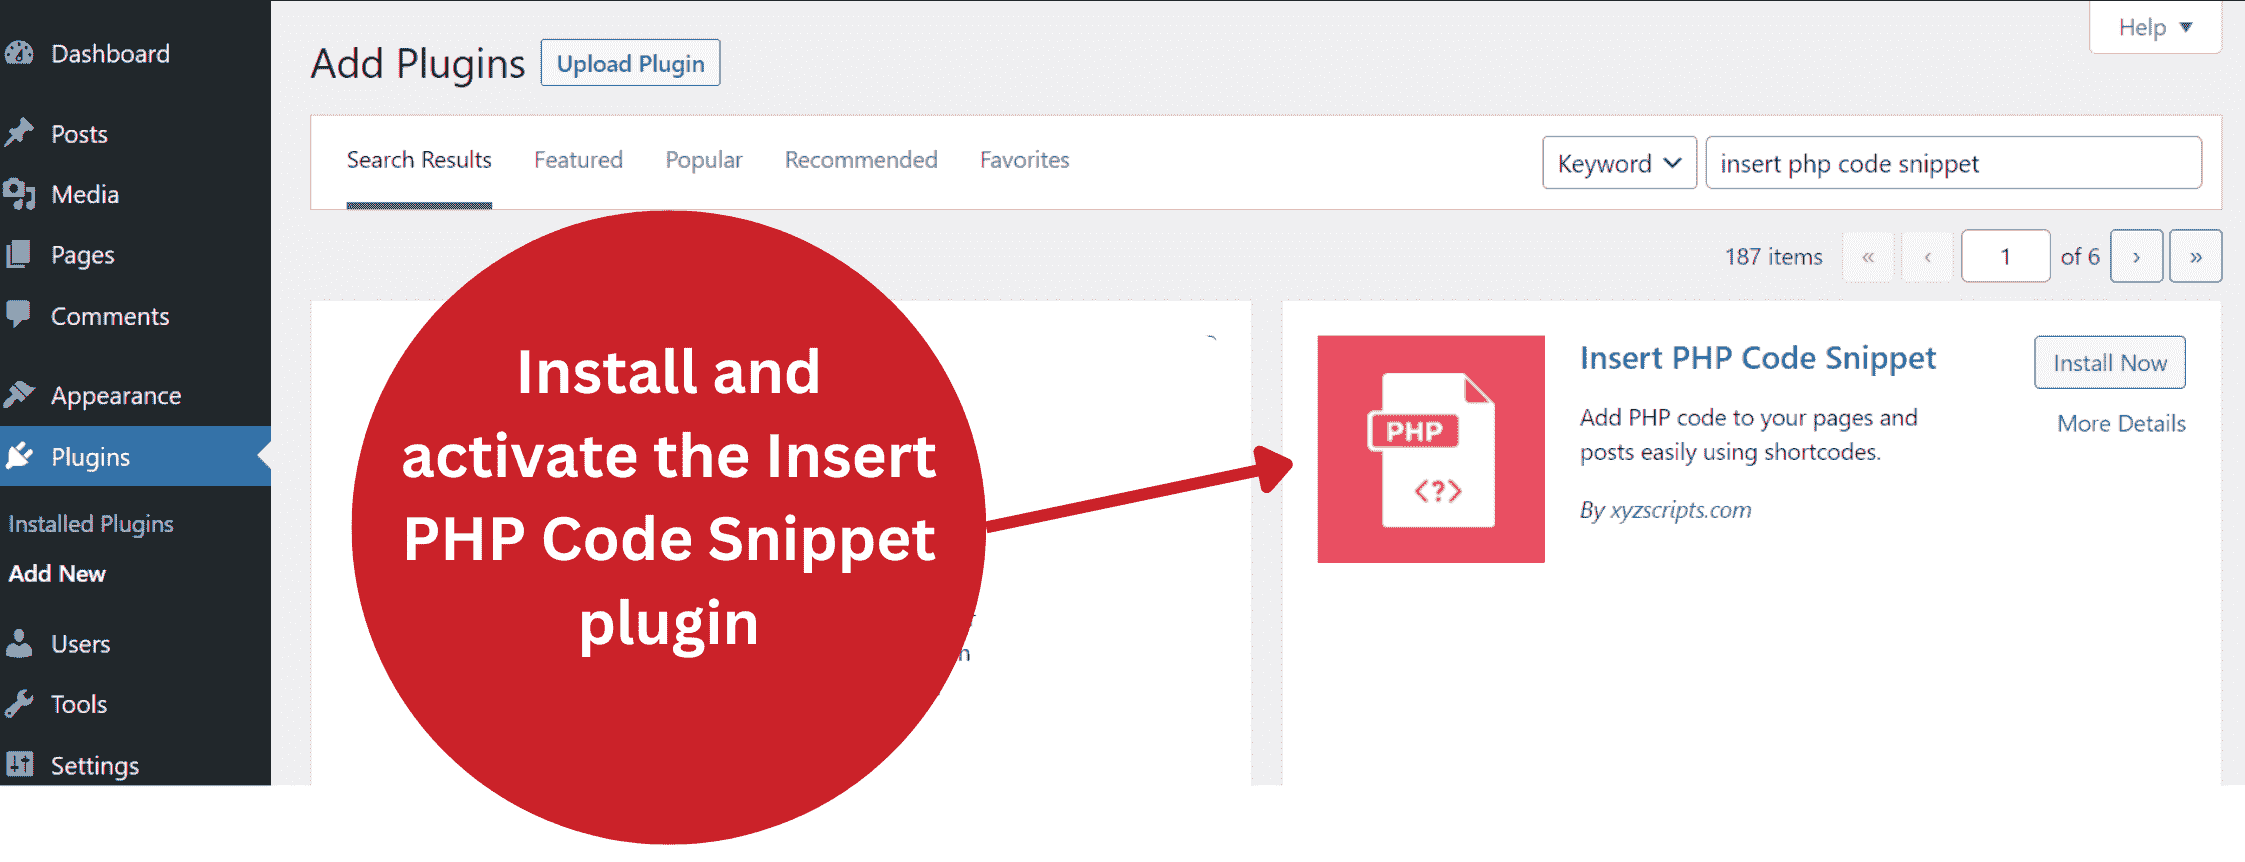 Install-and-activate-the-Insert-PHP-Code-Snippet-plugin